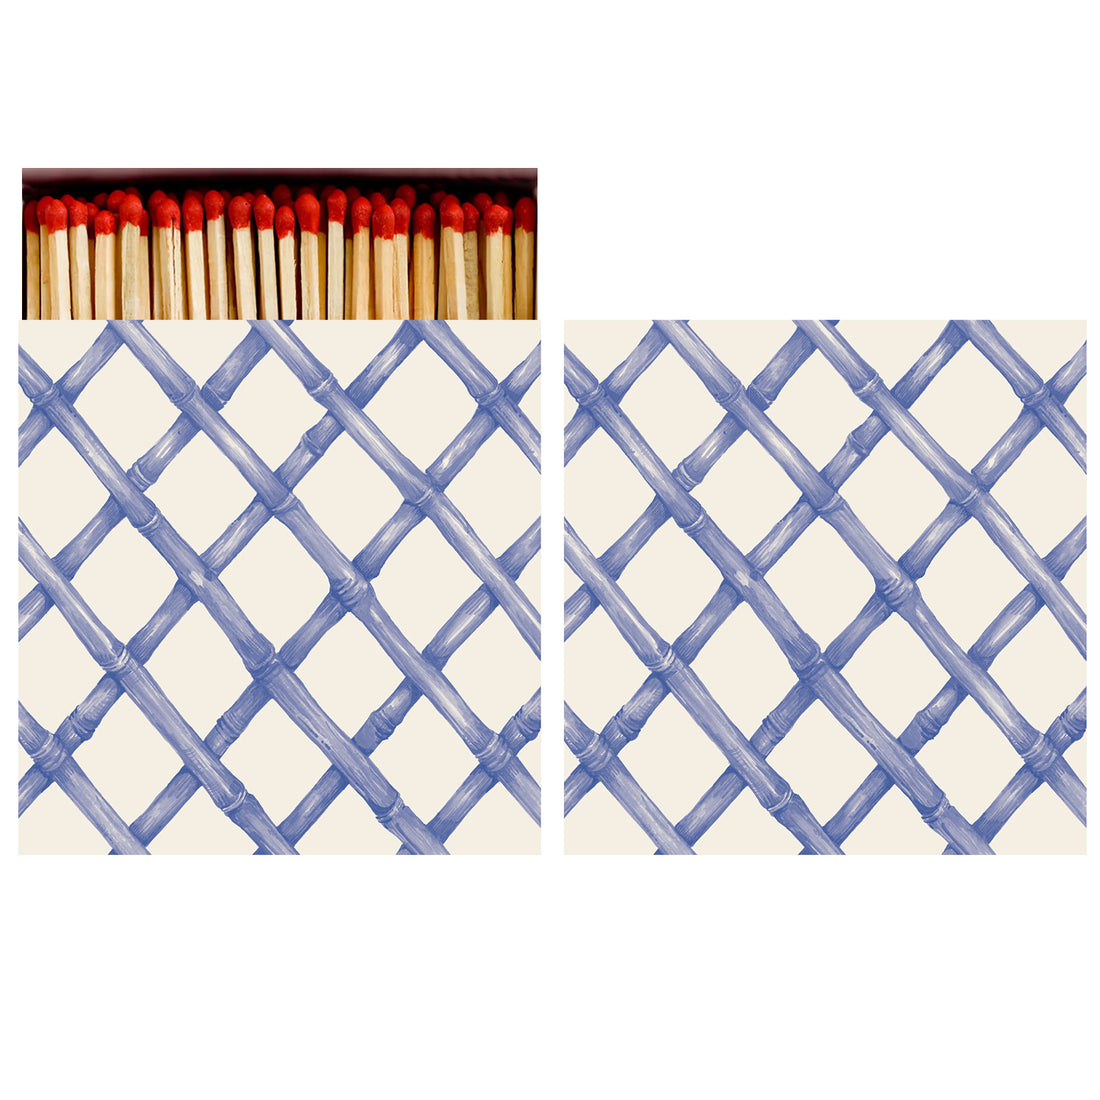 Two identical sides of a square match box, the left of which is open slightly to reveal the matches inside. The artwork on the box is a blue monochrome pattern of diagonal bamboo lattice on a white background.